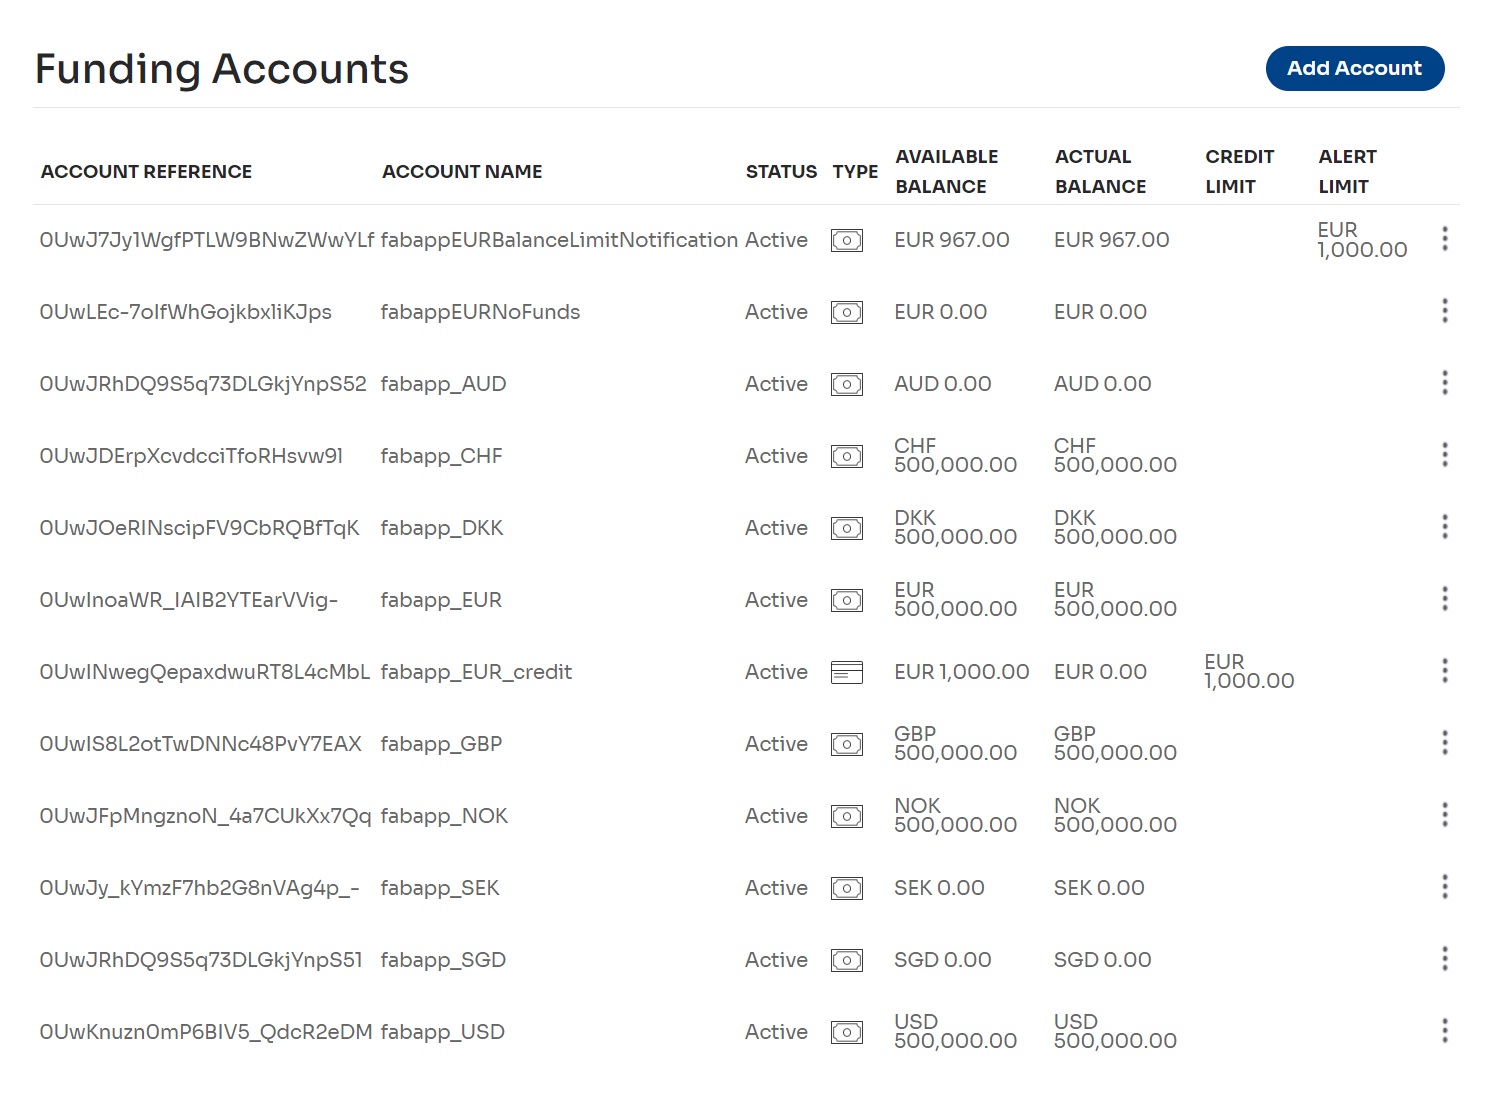 Figure 1: The Funding Accounts page